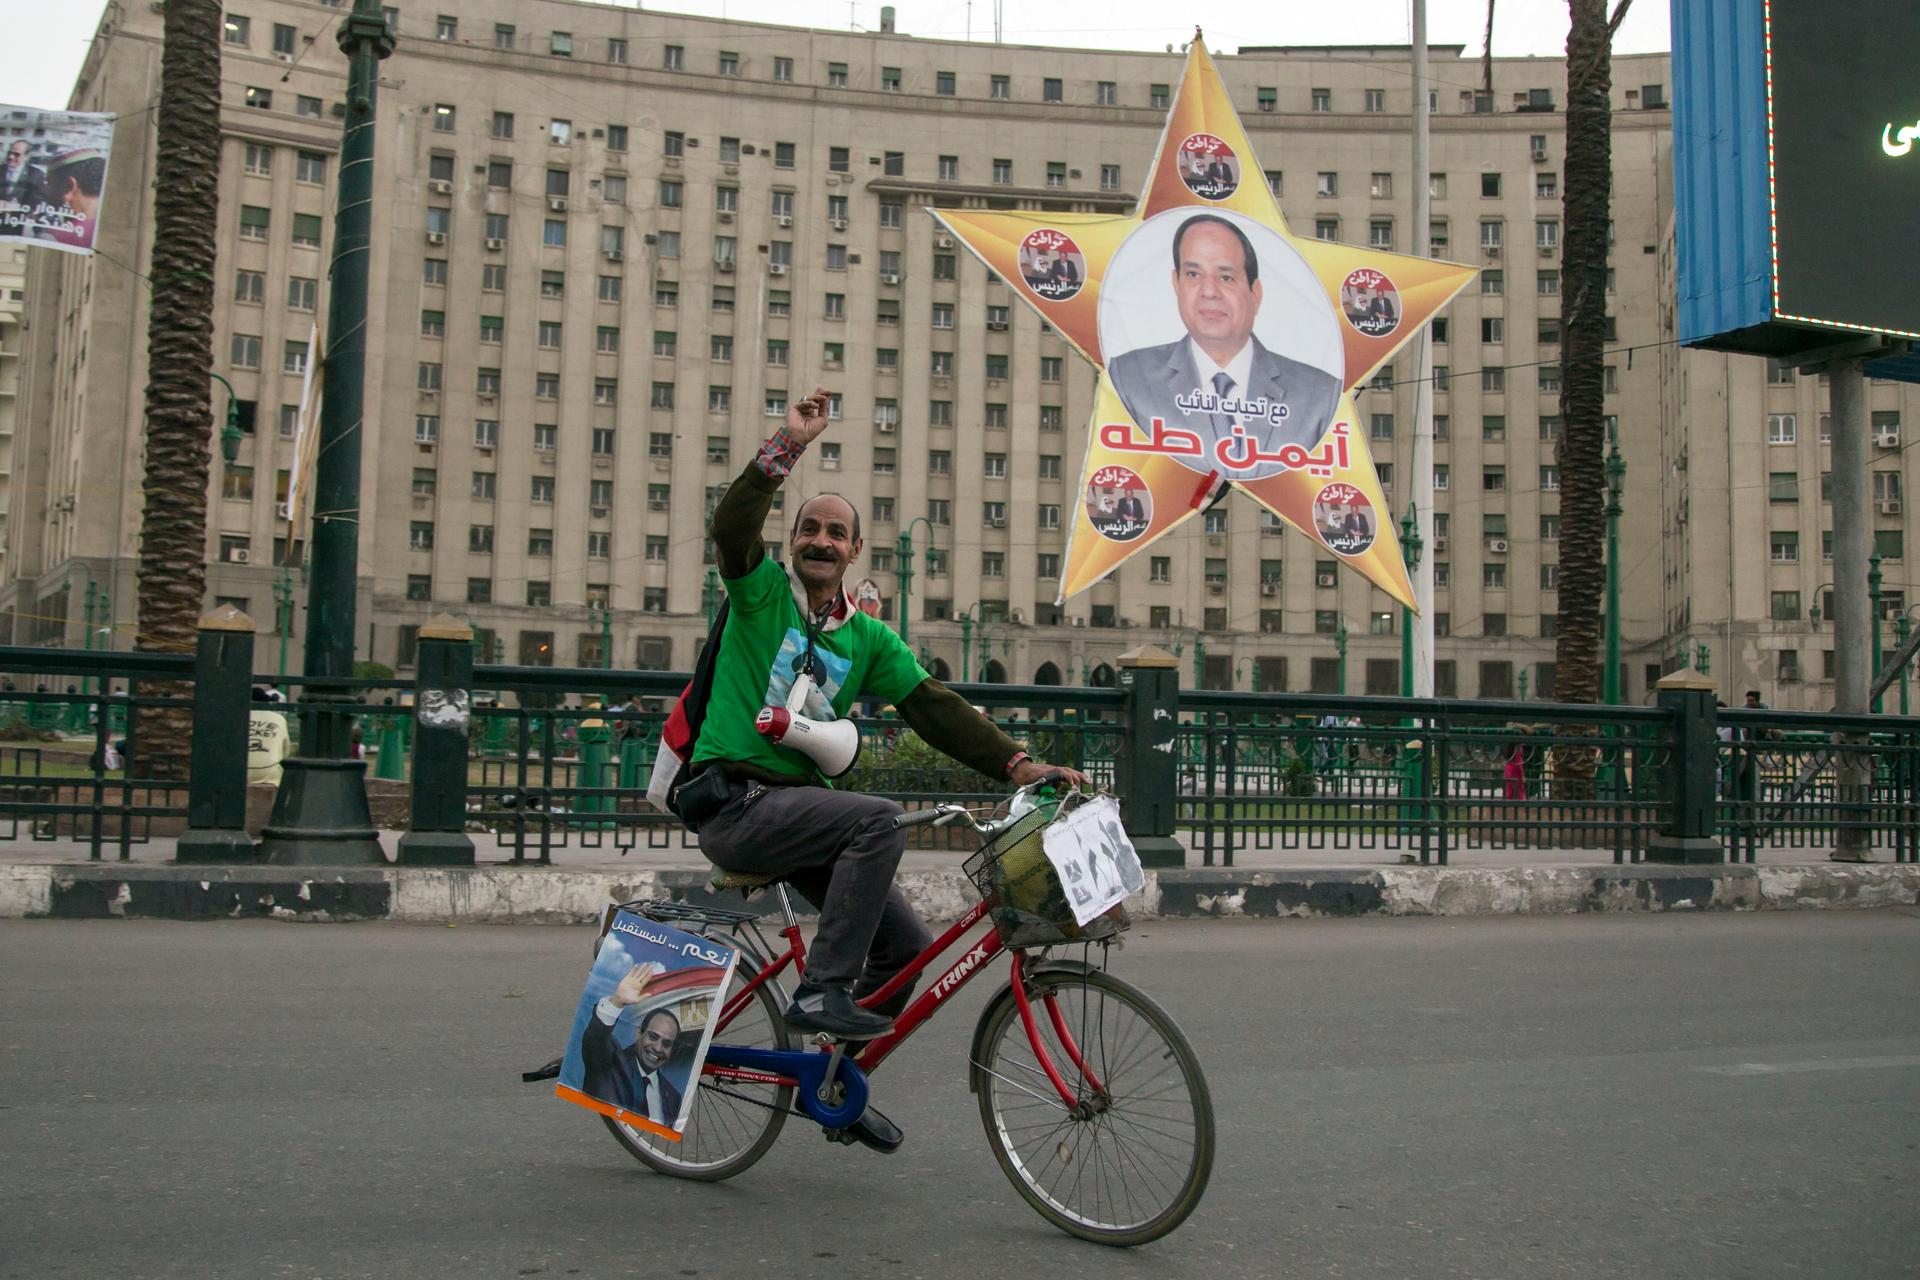 A supporter of Abdel Fatteh el-Sisi campaigns for the president in Tahrir Square ahead of the election today.